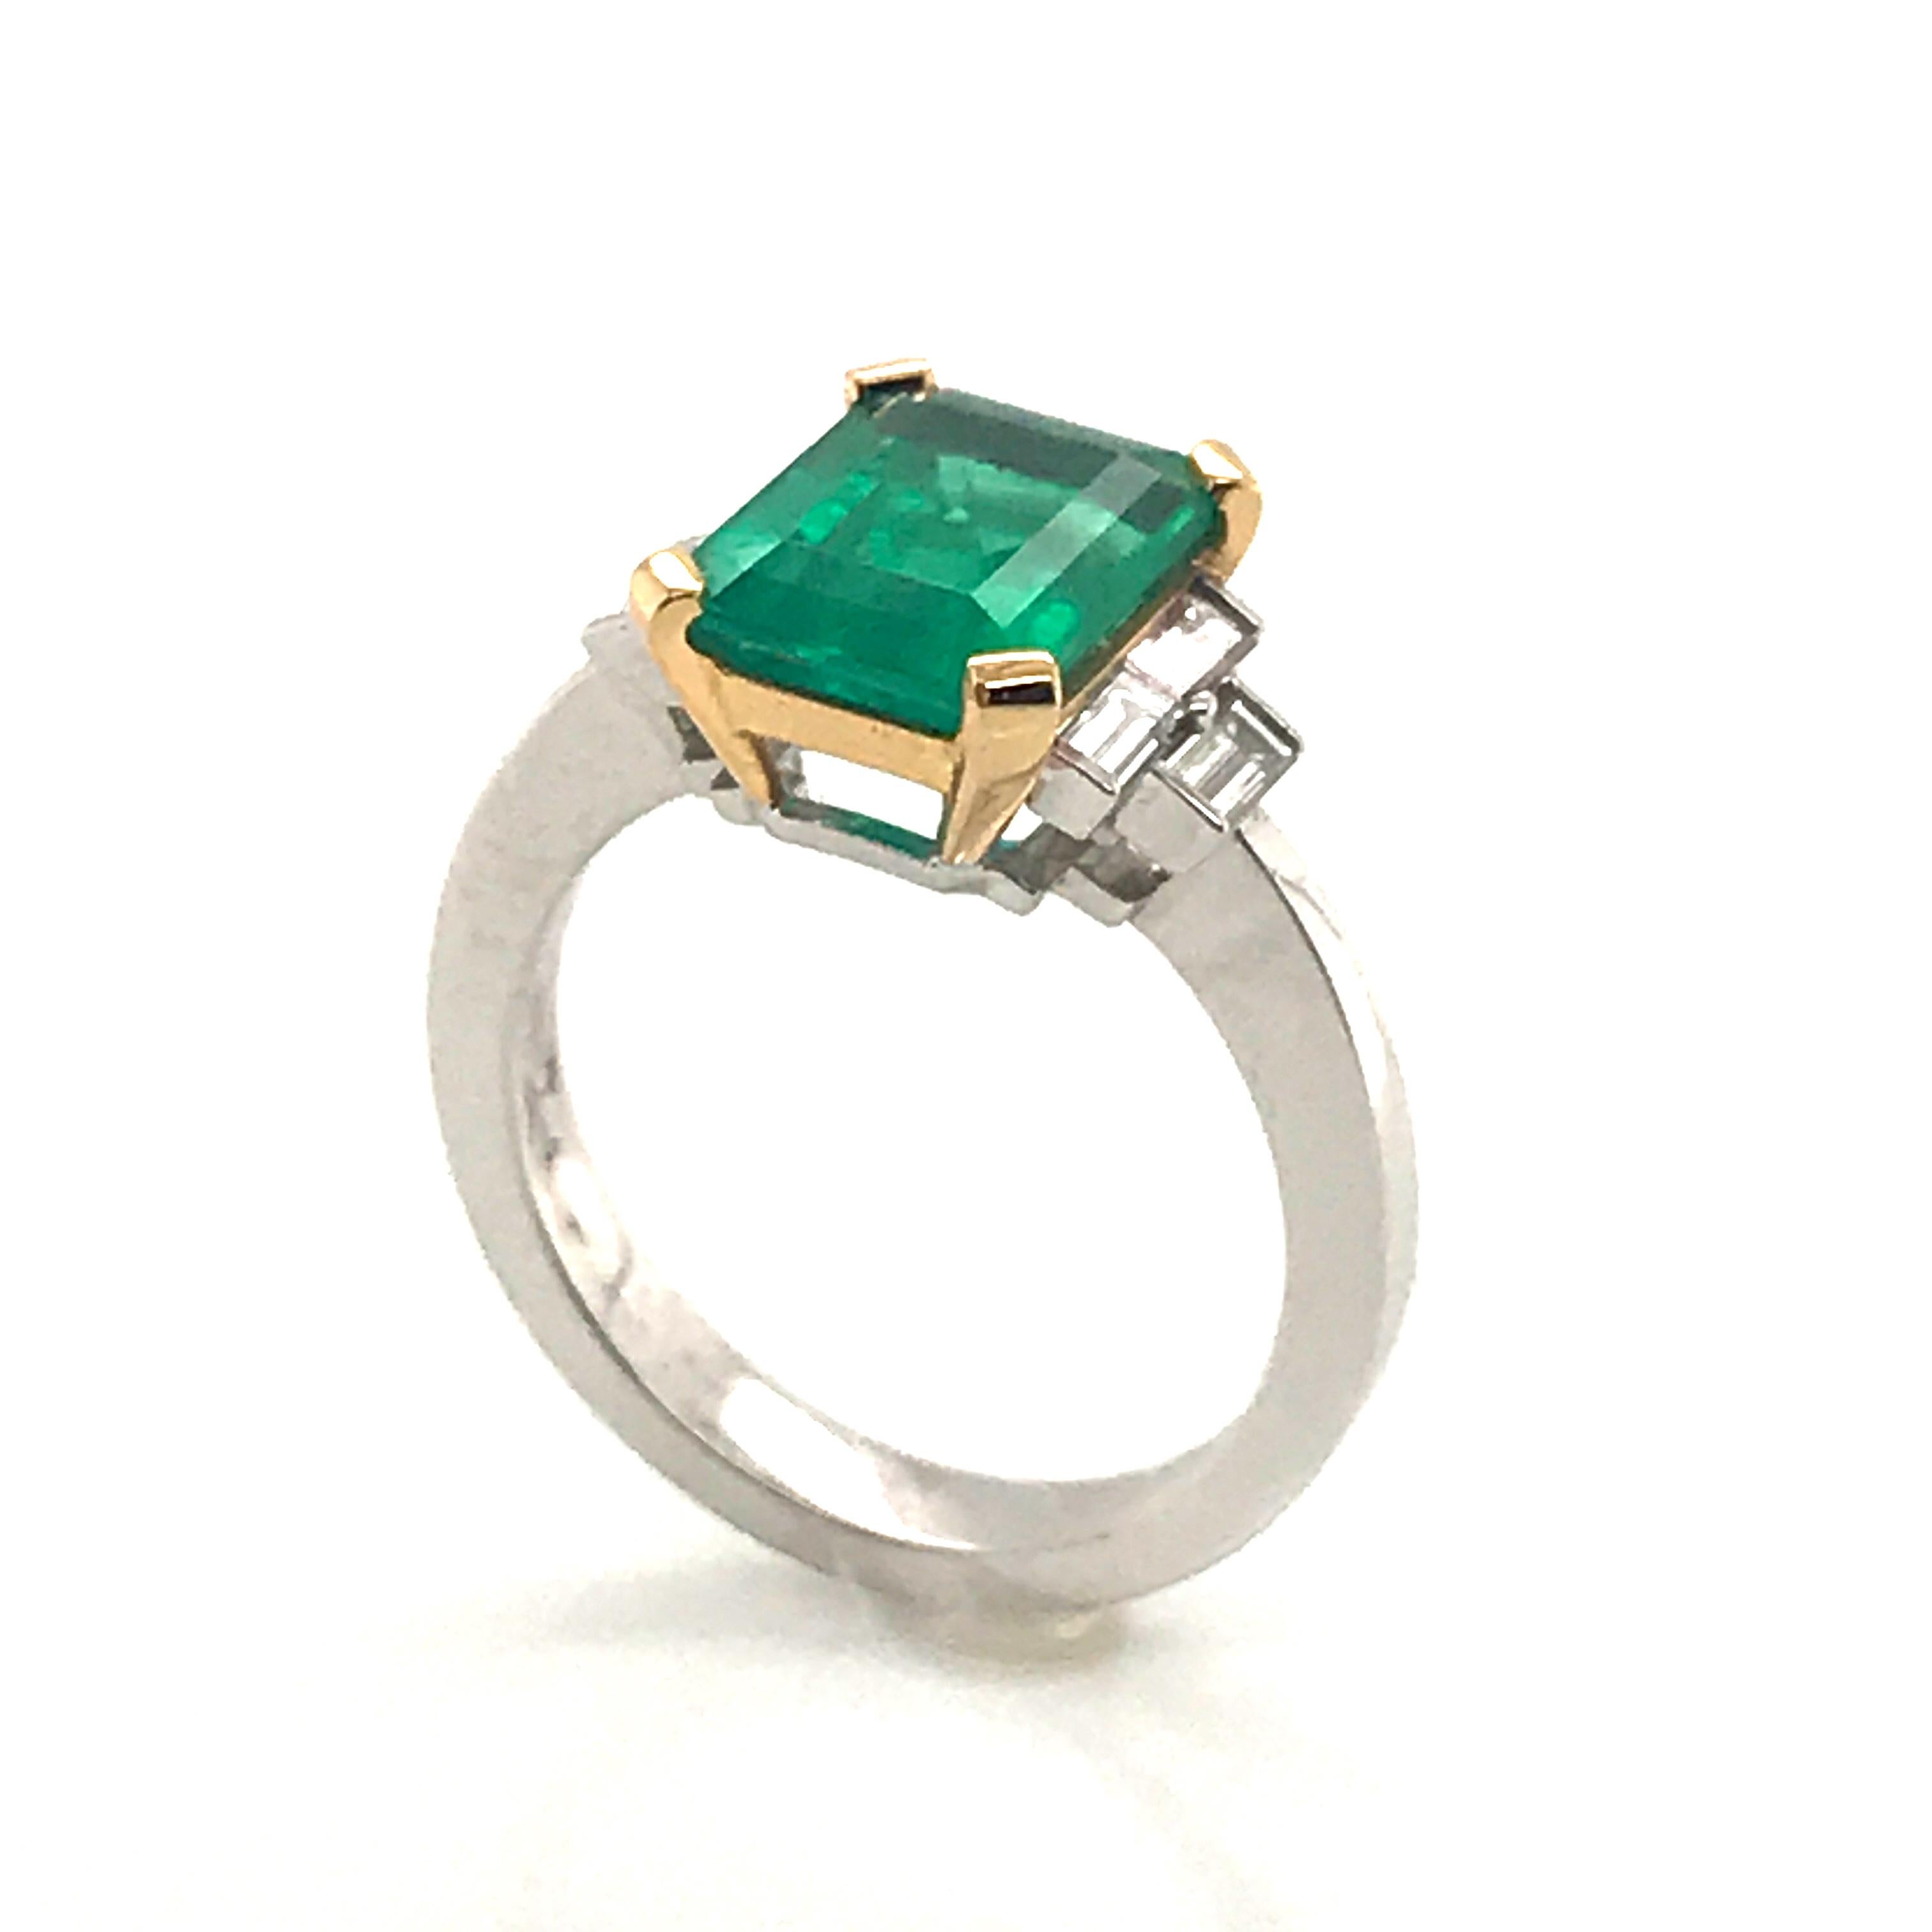 Certified Emerald 2.68 Karat White Diamonds on with Gold Engagement Ring 7